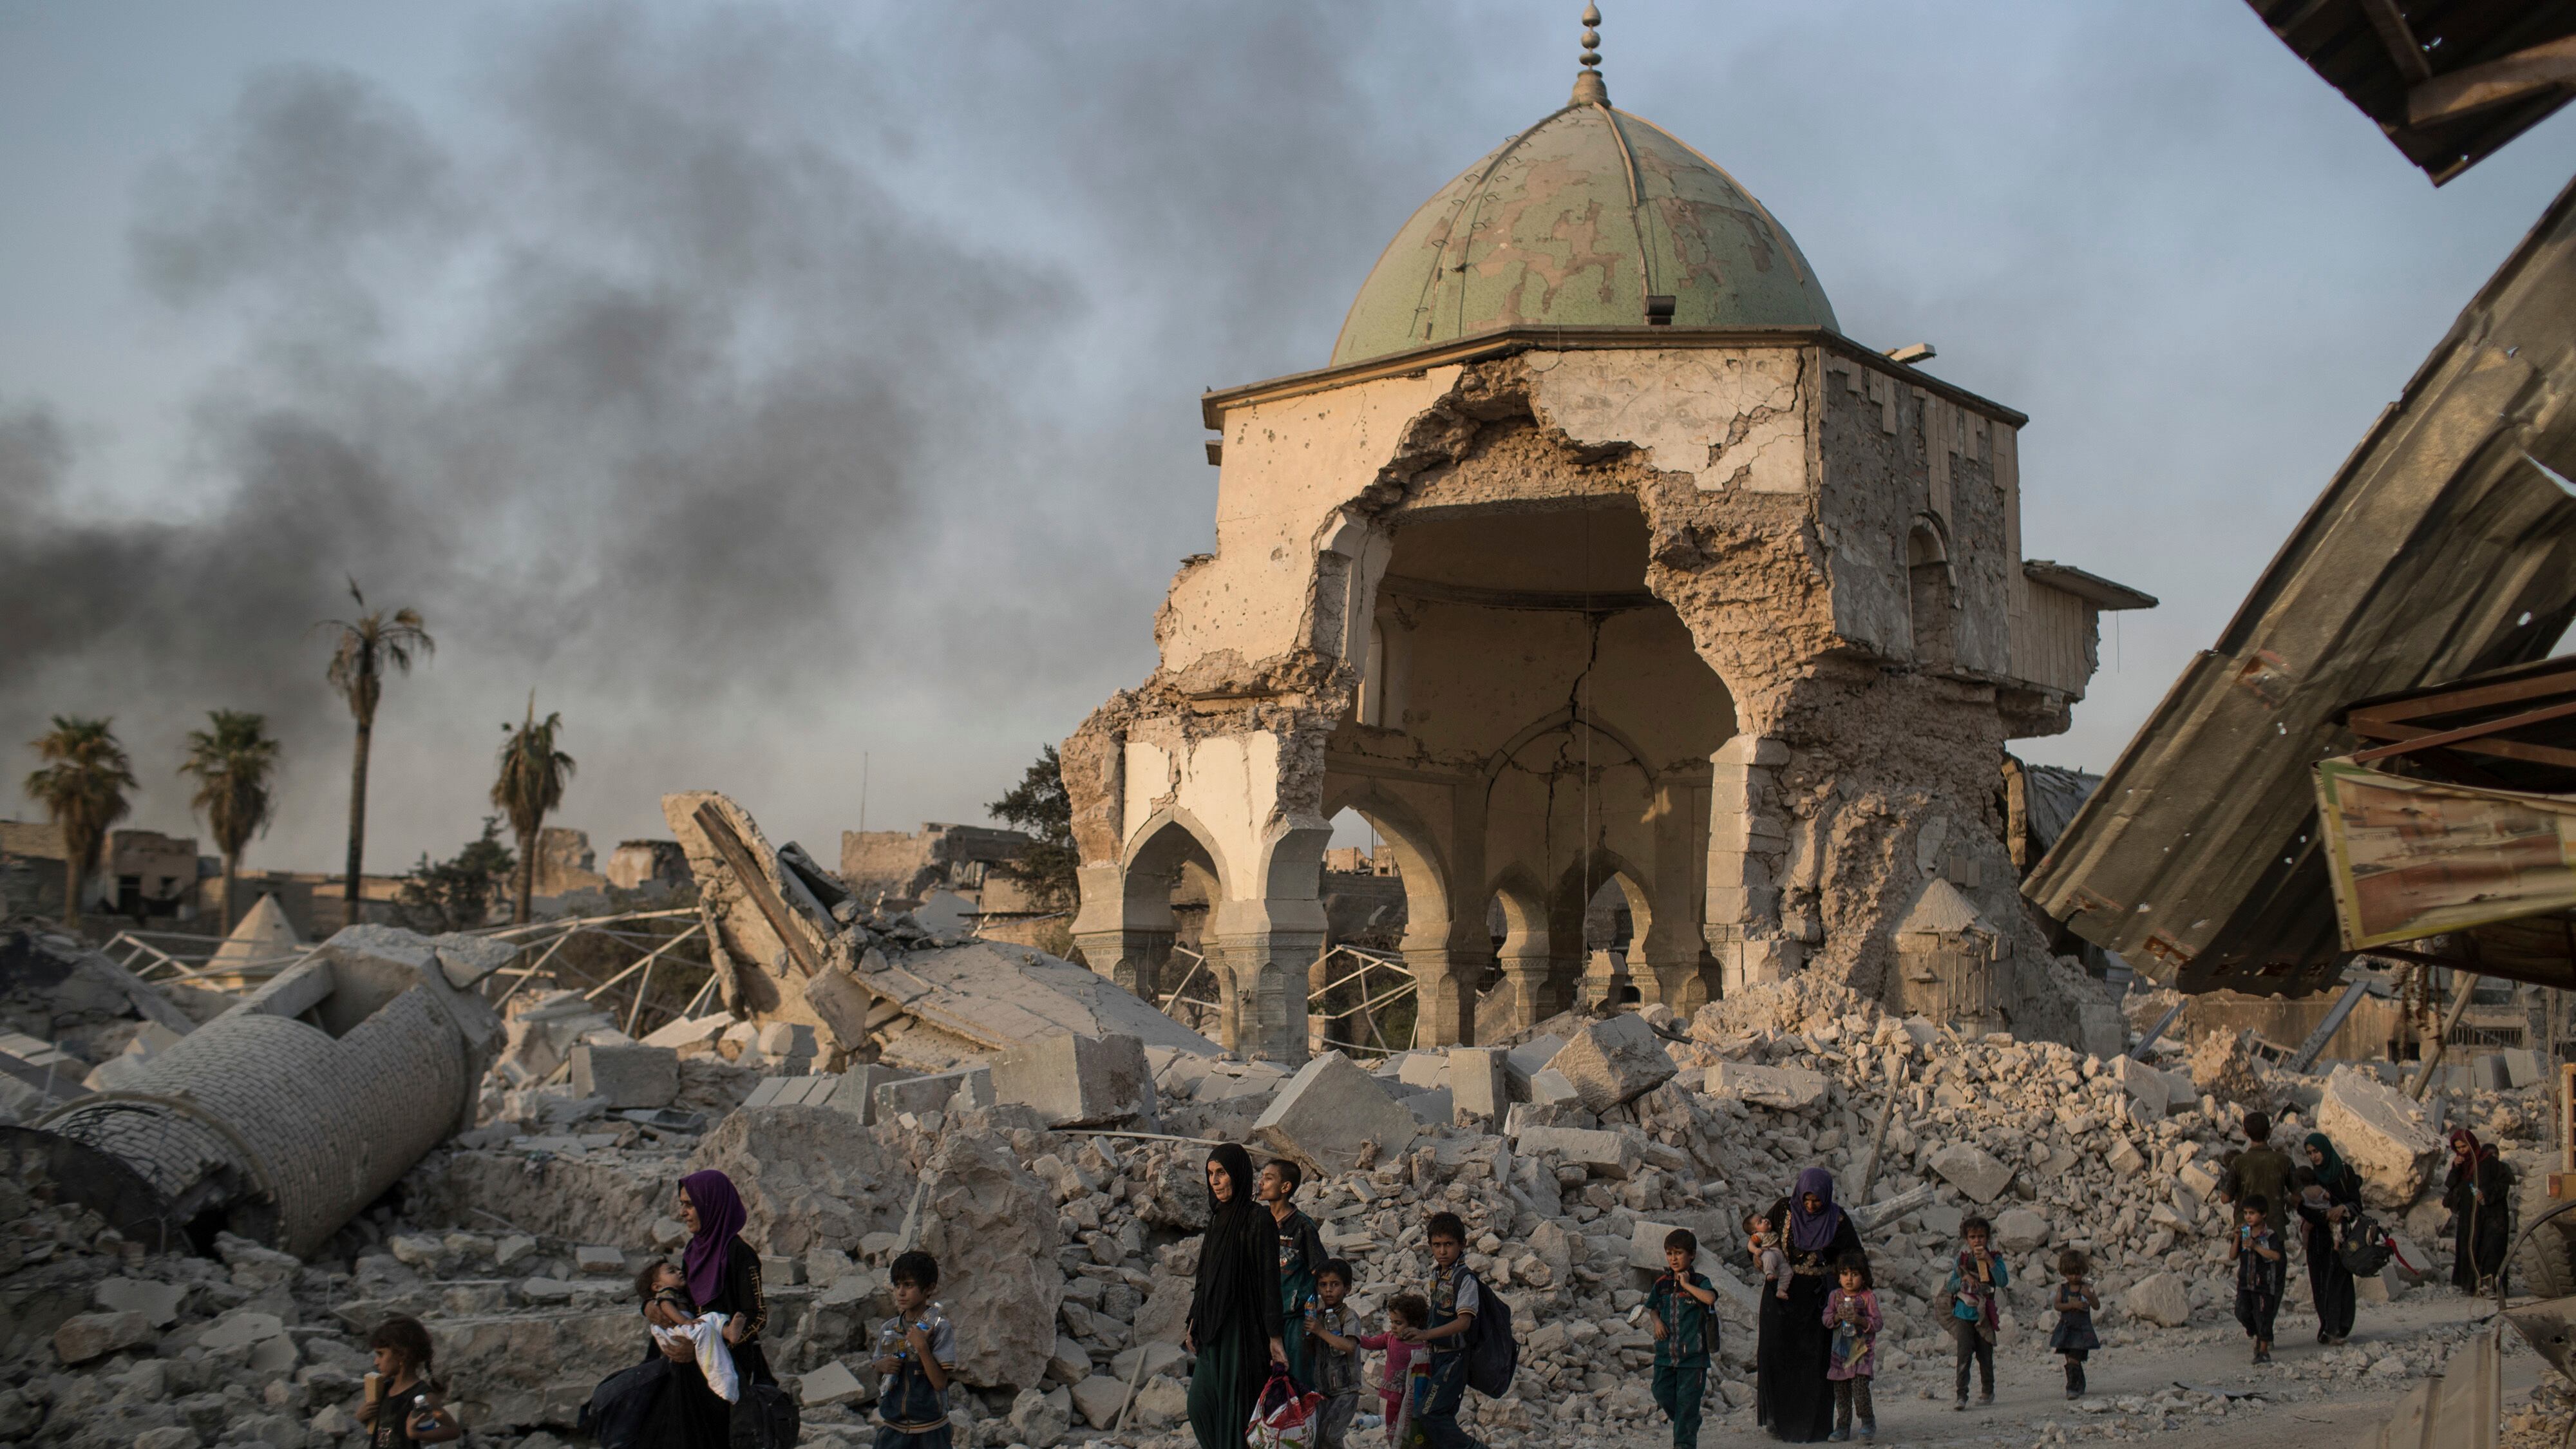 Five bombs were found hidden within the walls of the mosque, which was destroyed in 2017 (AP)